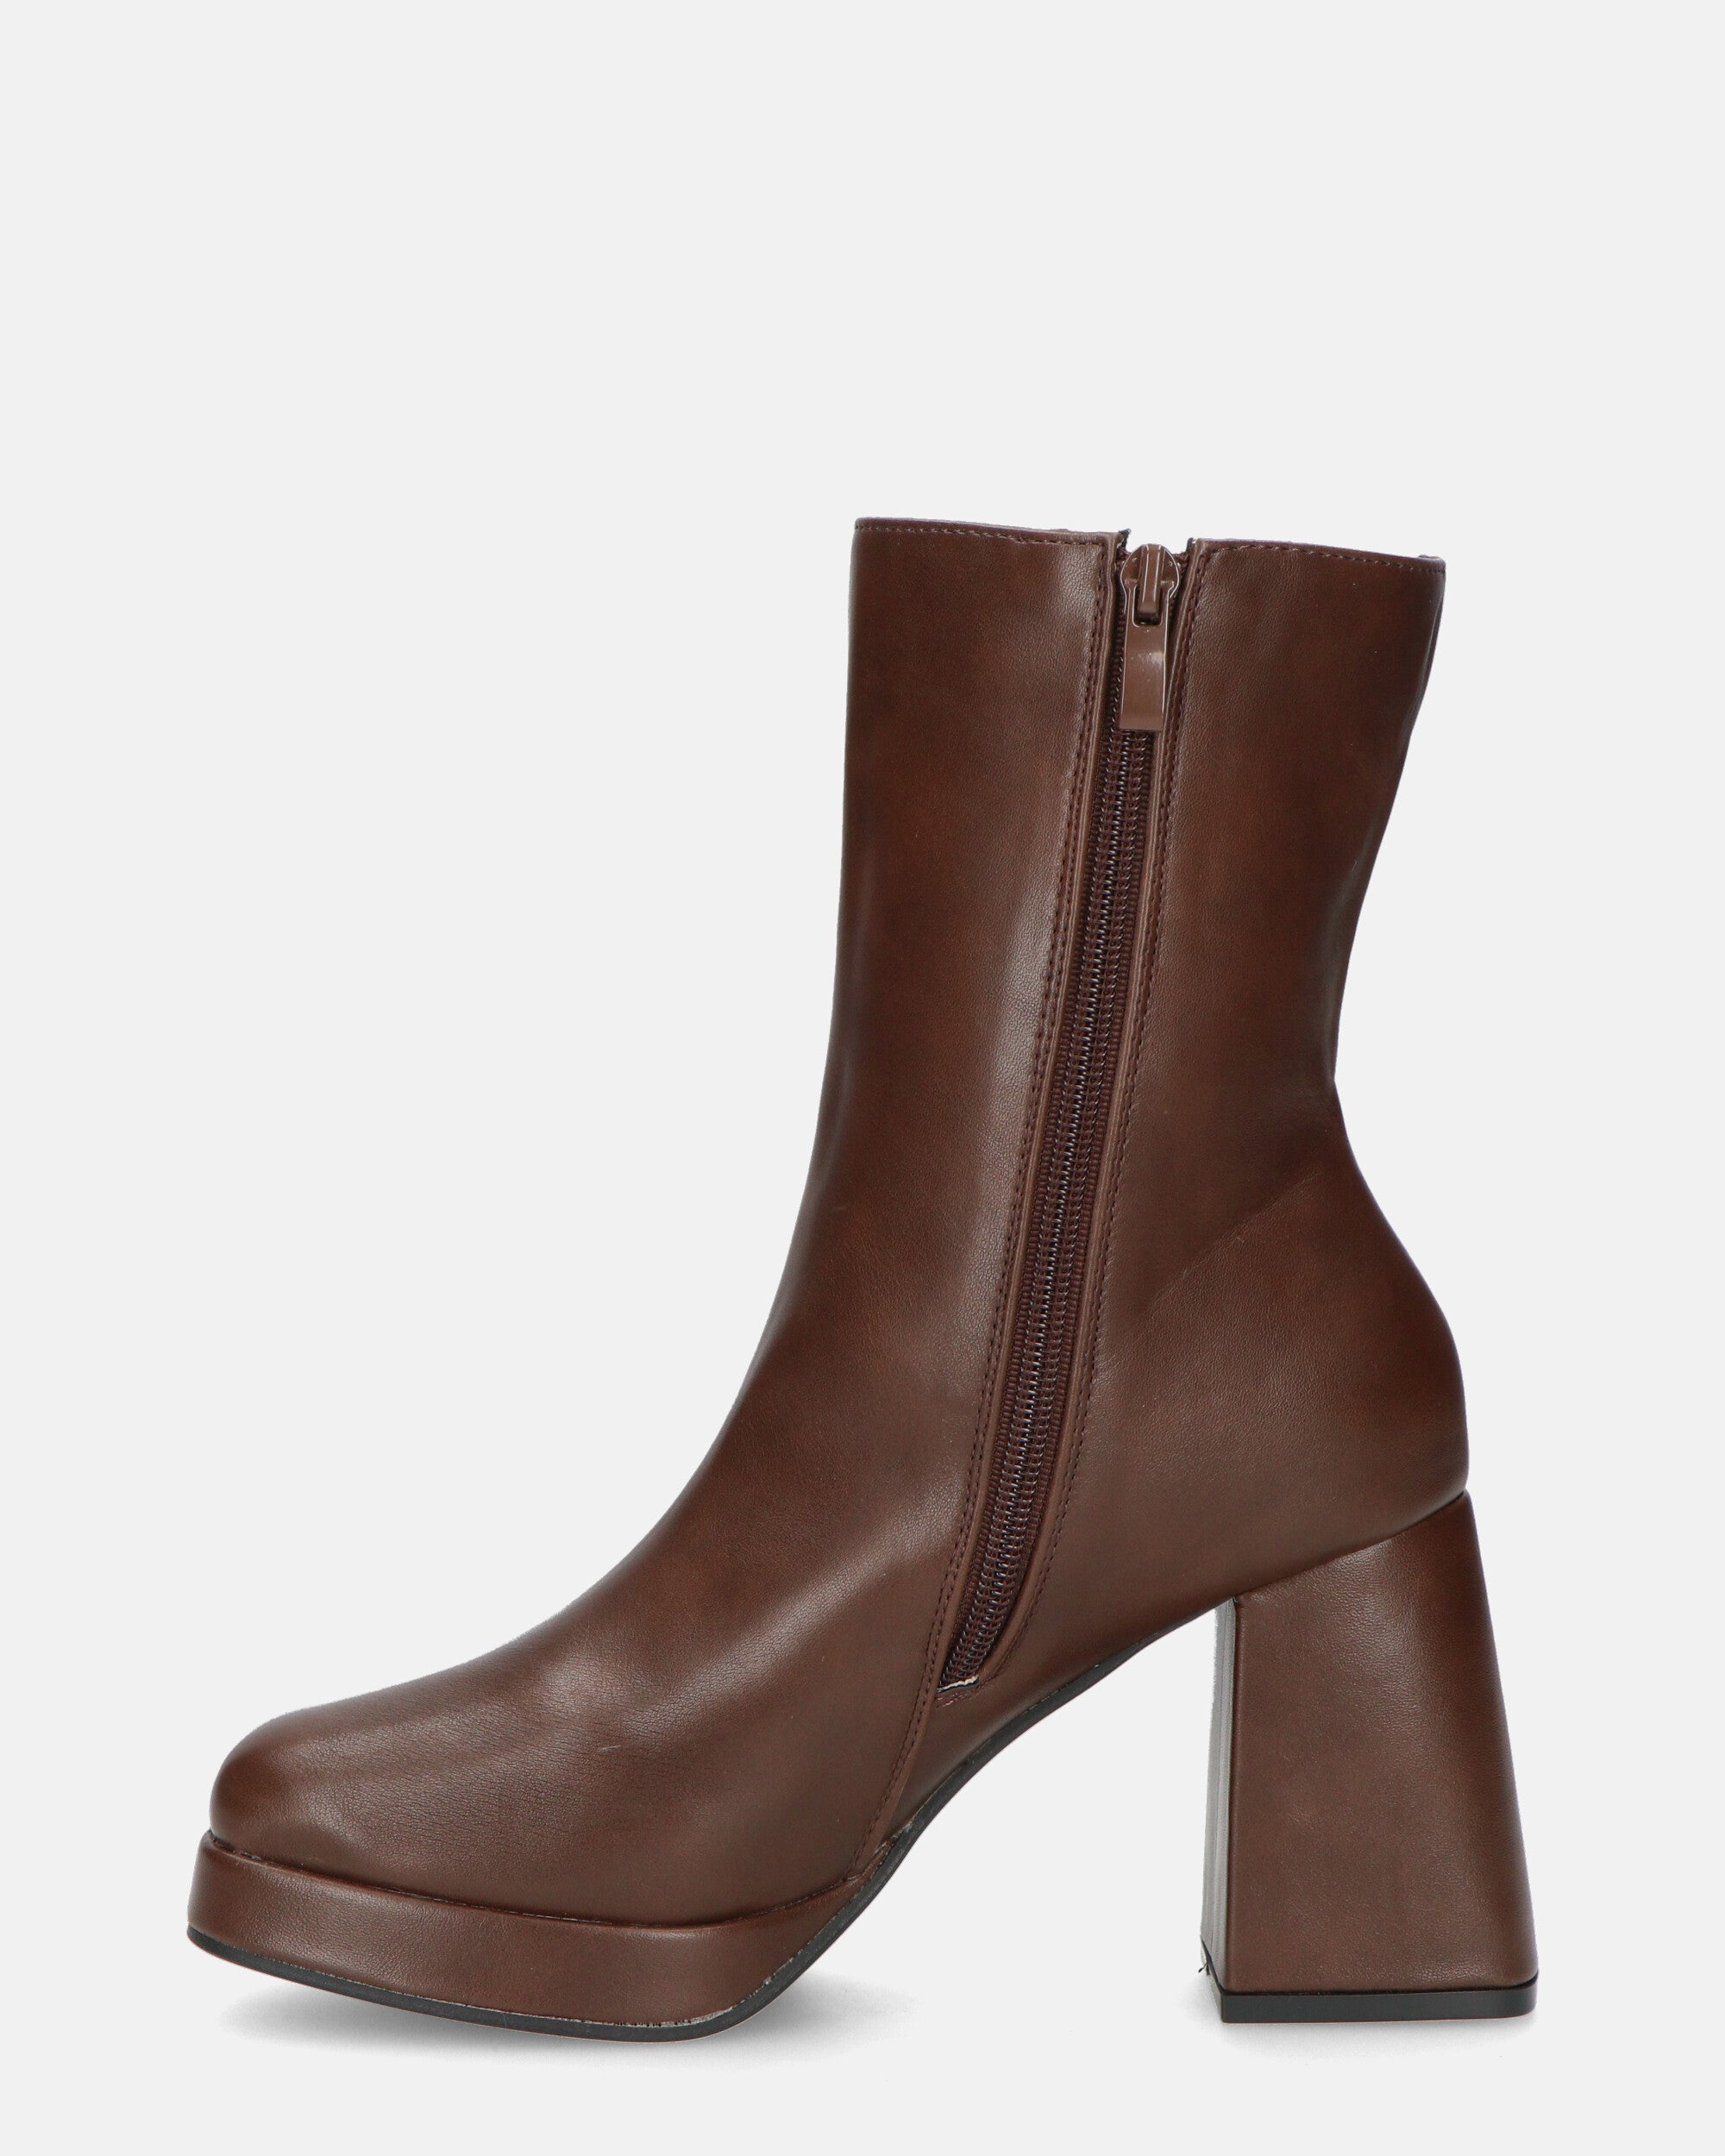 AROA - brown heeled ankle boots with zip